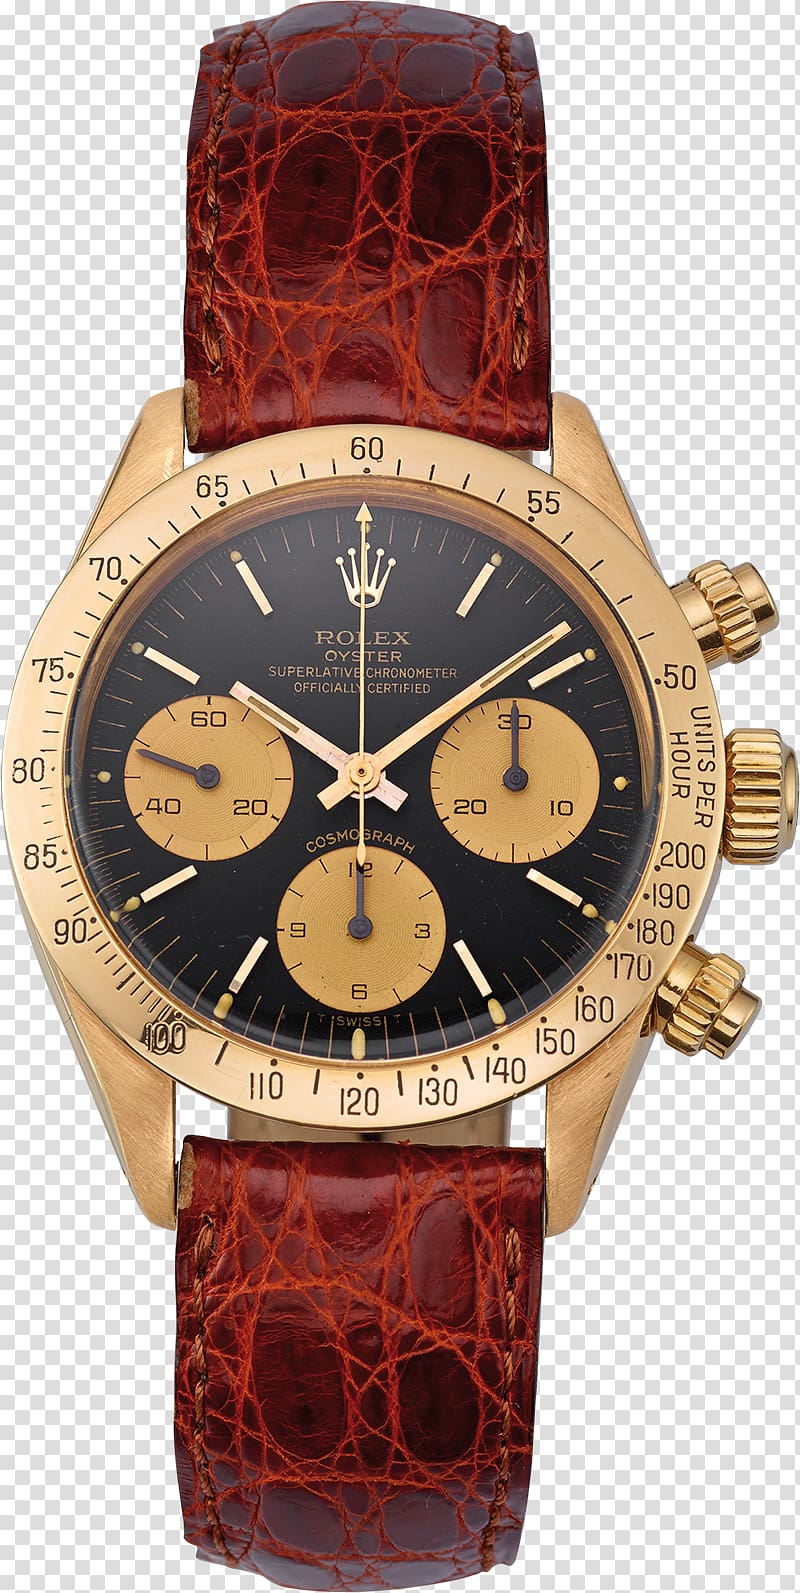 Watch strap Watch strap Omega Seamaster Leather, Rolex Daytona transparent background PNG clipart